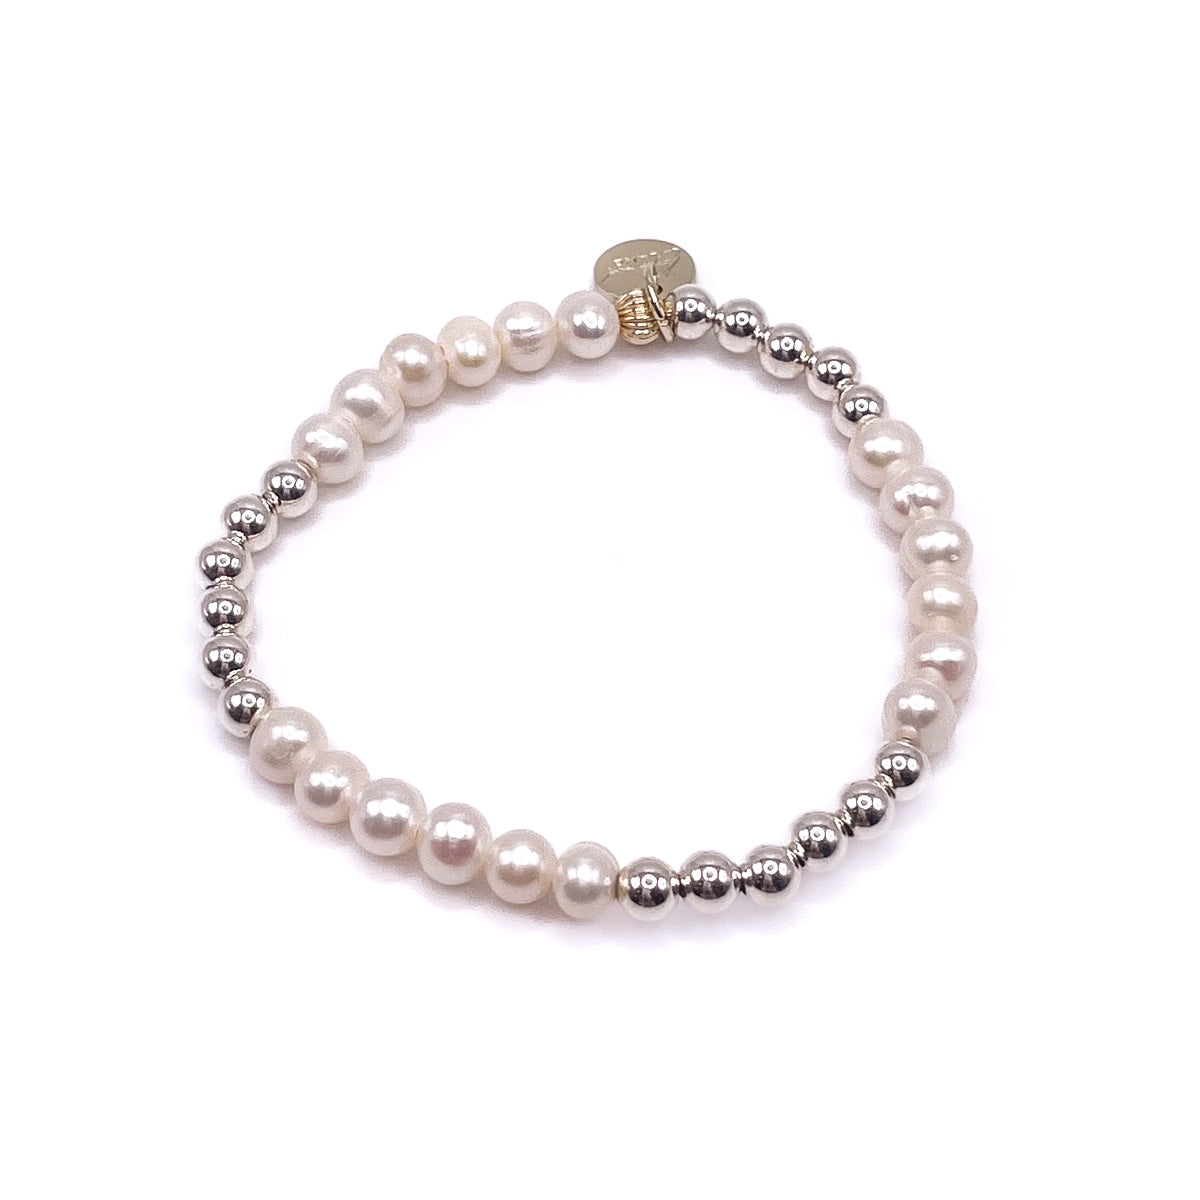 5mm Silver Ball and Freshwater Pearl Stretch Bracelet - Silver